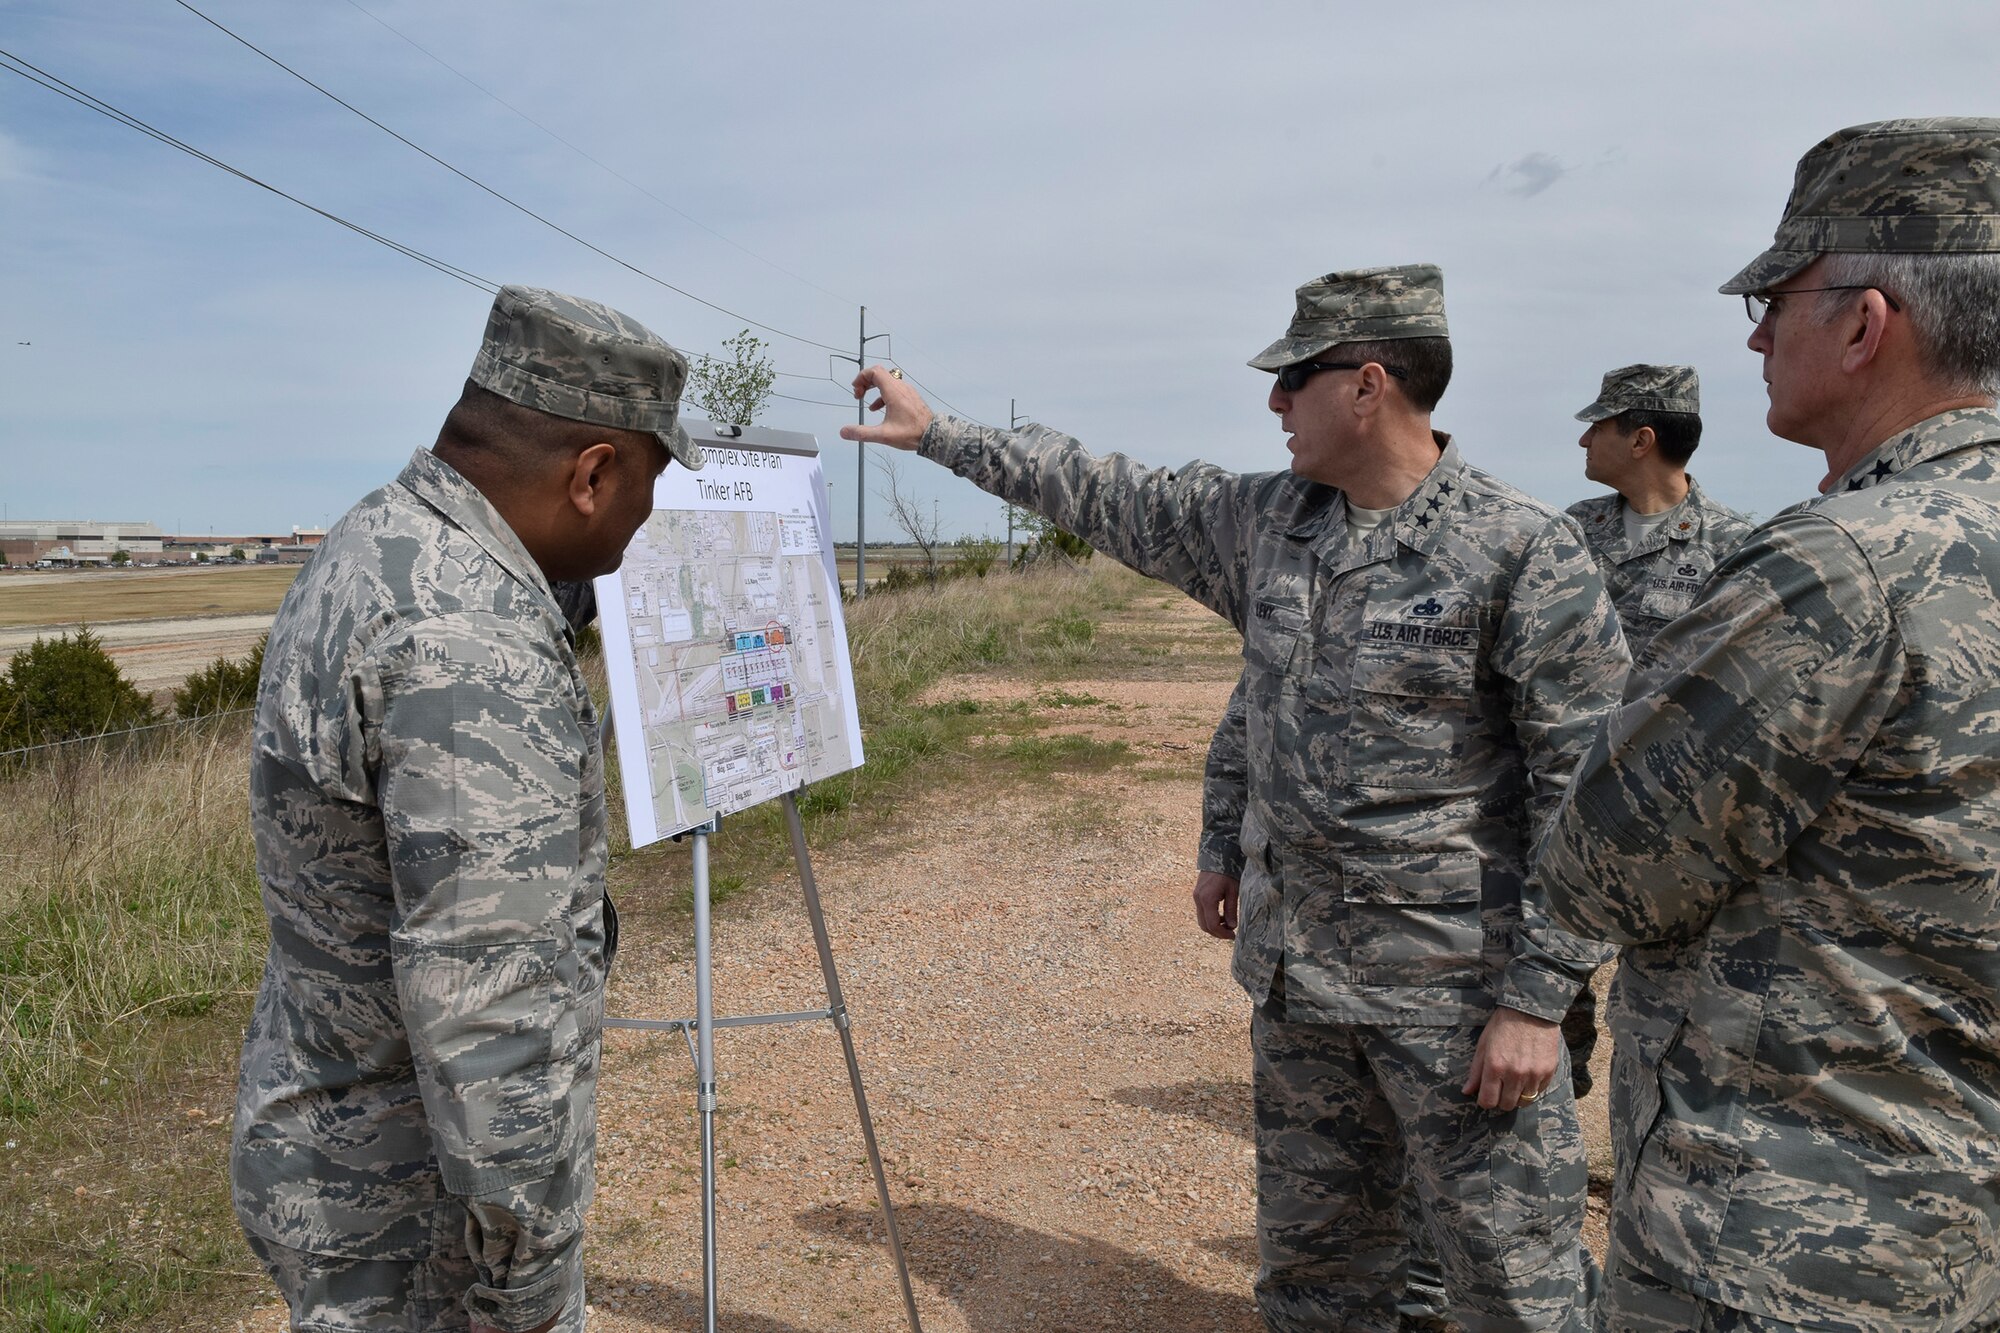 Lt. Gen. Lee K. Levy II, Air Force Sustainment Center Commander, points out key locations of the KC-46A industrial area to Gen. Paul J. Selva, Vice Chairman of the Joint Chiefs of Staff, right, after a briefing on the capacity and capability of Bldg. 9001 and the military construction plan for the new KC-46A industrial area. The briefing, conducted April 1 at the KC-46A industrial area overlook site north of Bldg. 9001, also highlighted how close community relations resulted in the Air Force being able to acquire the area.  (U.S. Air Force photo by Greg L. Davis)